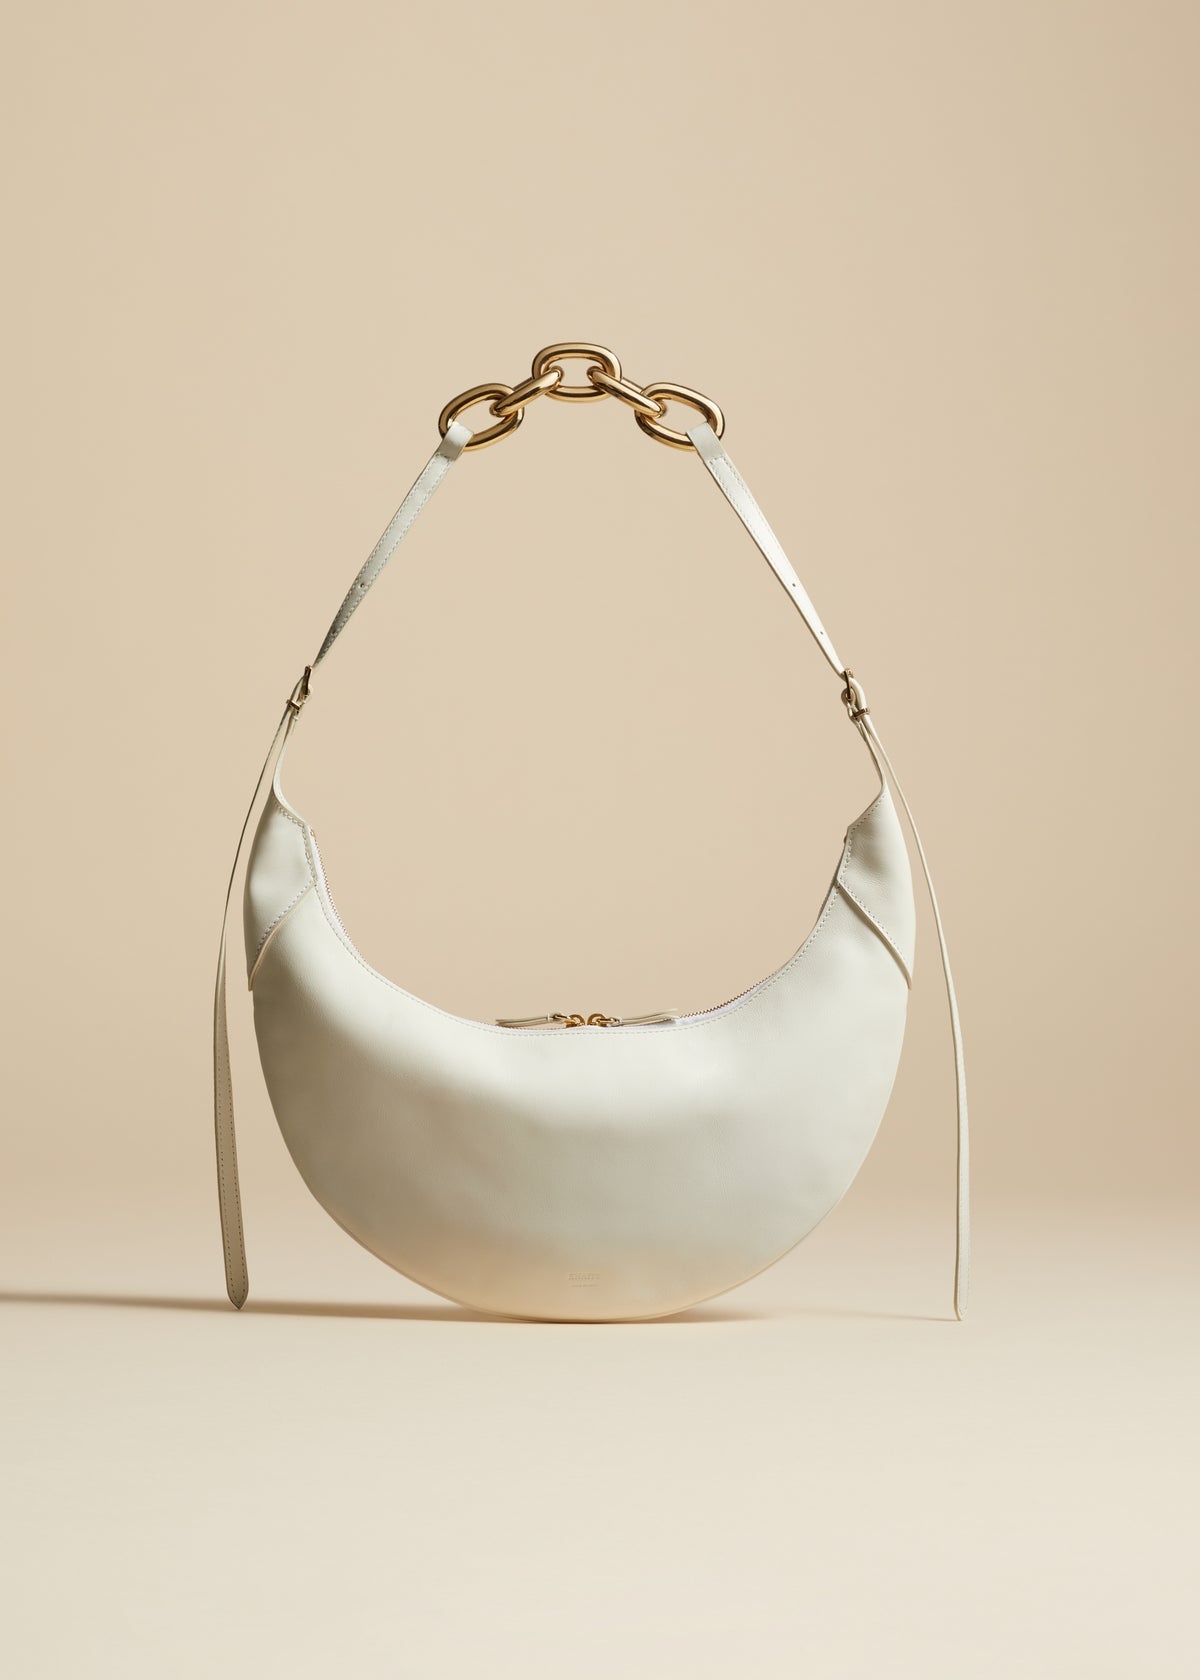 The Alessia Shoulder Bag in White Leather - 1